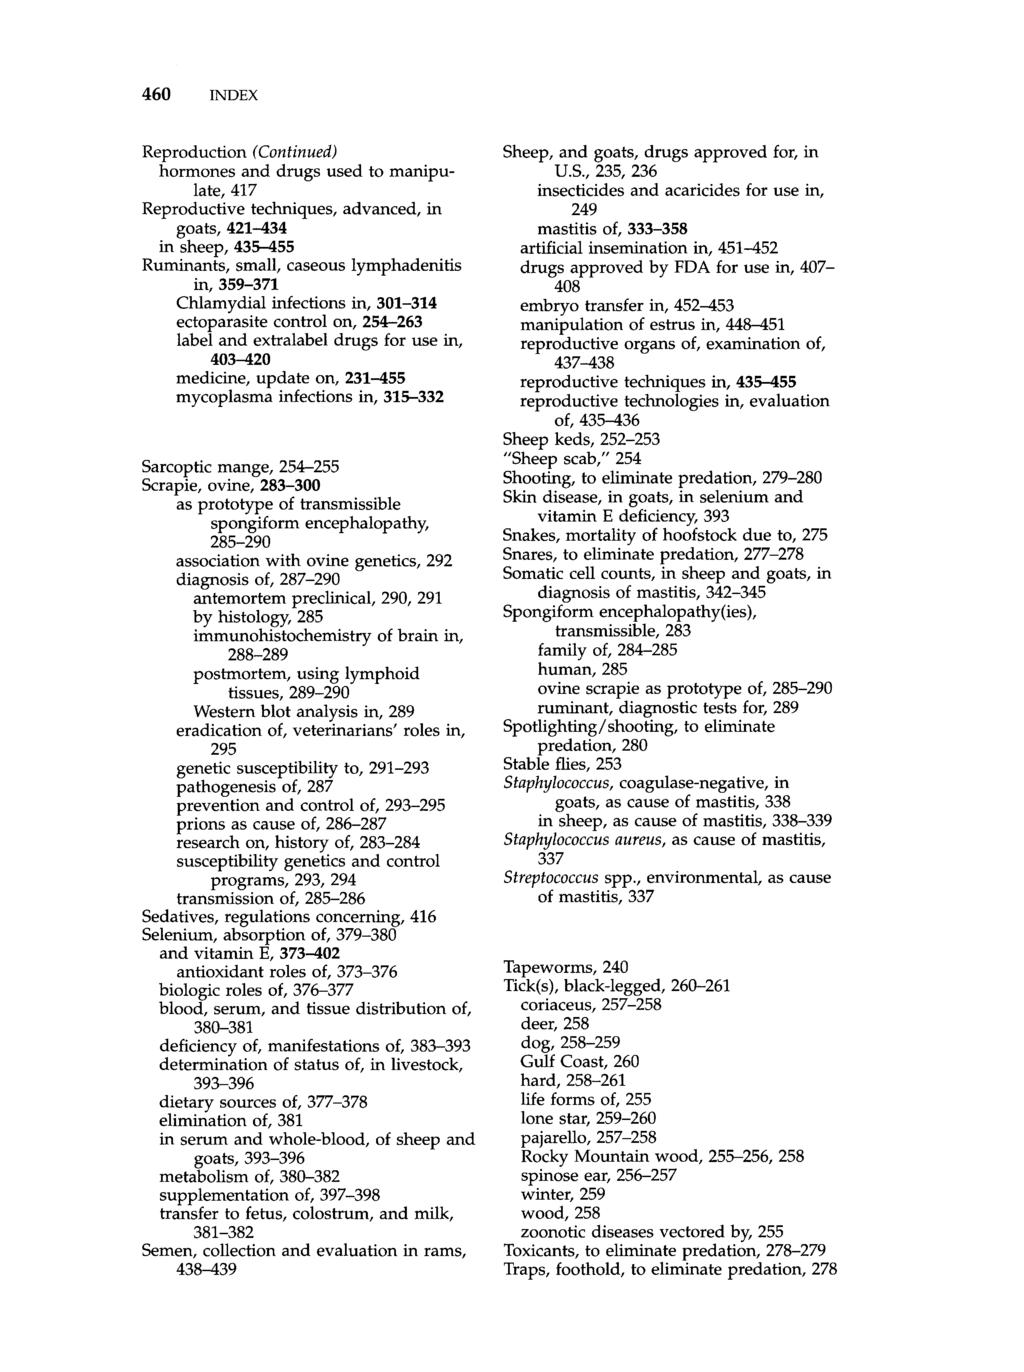 460 INDEX Reproduction (Continued) hormones and drugs used to manipulate, 417 Reproductive techniques, advanced, in goats, 421-434 in sheep, 435-455 Ruminants, small, caseous lymphadenitis in,359-371